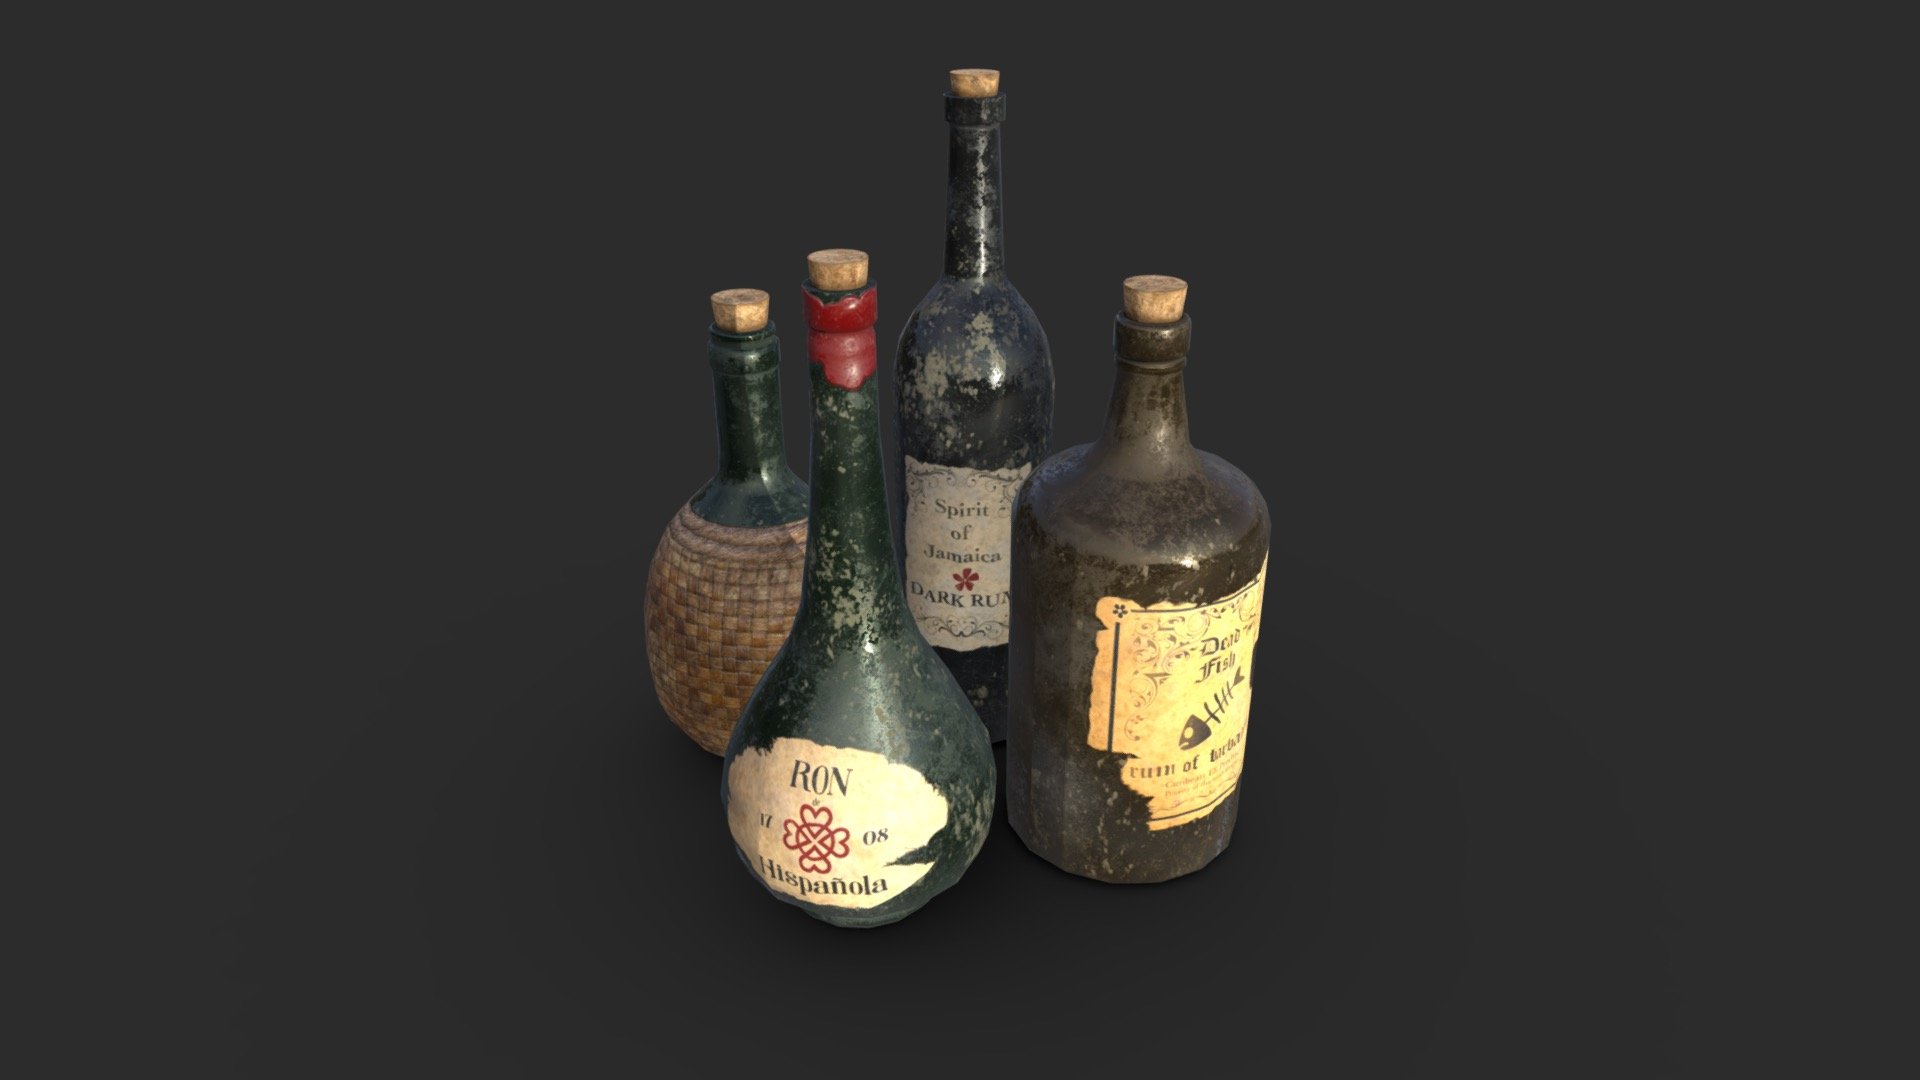 This vintage rum bottle pack including 4 individual objects with 3 LODs and collision boxes to get the best optimization and the best quality for the most popular game engines. 



This AAA game asset of old rum bottles will embellish you scene and add more details which can help the gameplay and the game-design.

Low-poly model &amp; Blender native 2.91

SPECIFICATIONS


Objects : 4
Polygons : 1200
Subdivision ready : Yes
Render engine : Eevee (Cycles ready)

GAME SPECS


LODs : Yes (inside FBX for Unity &amp; Unreal)
Numbers of LODs : 3
Collider : Yes
Lightmap UV : No

EXPORTED FORMATS


FBX
Collada
OBJ

TEXTURES


Materials in scene : 1
Textures sizes : 4K
Textures types : Base Color, Metallic, Roughness, Normal (DirectX &amp; OpenGL), Heigh &amp; AO (also Unity &amp; Unreal workflow maps)
Textures format : PNG
 - Old Rum Bottles - Buy Royalty Free 3D model by KangaroOz 3D (@KangaroOz-3D) 3d model